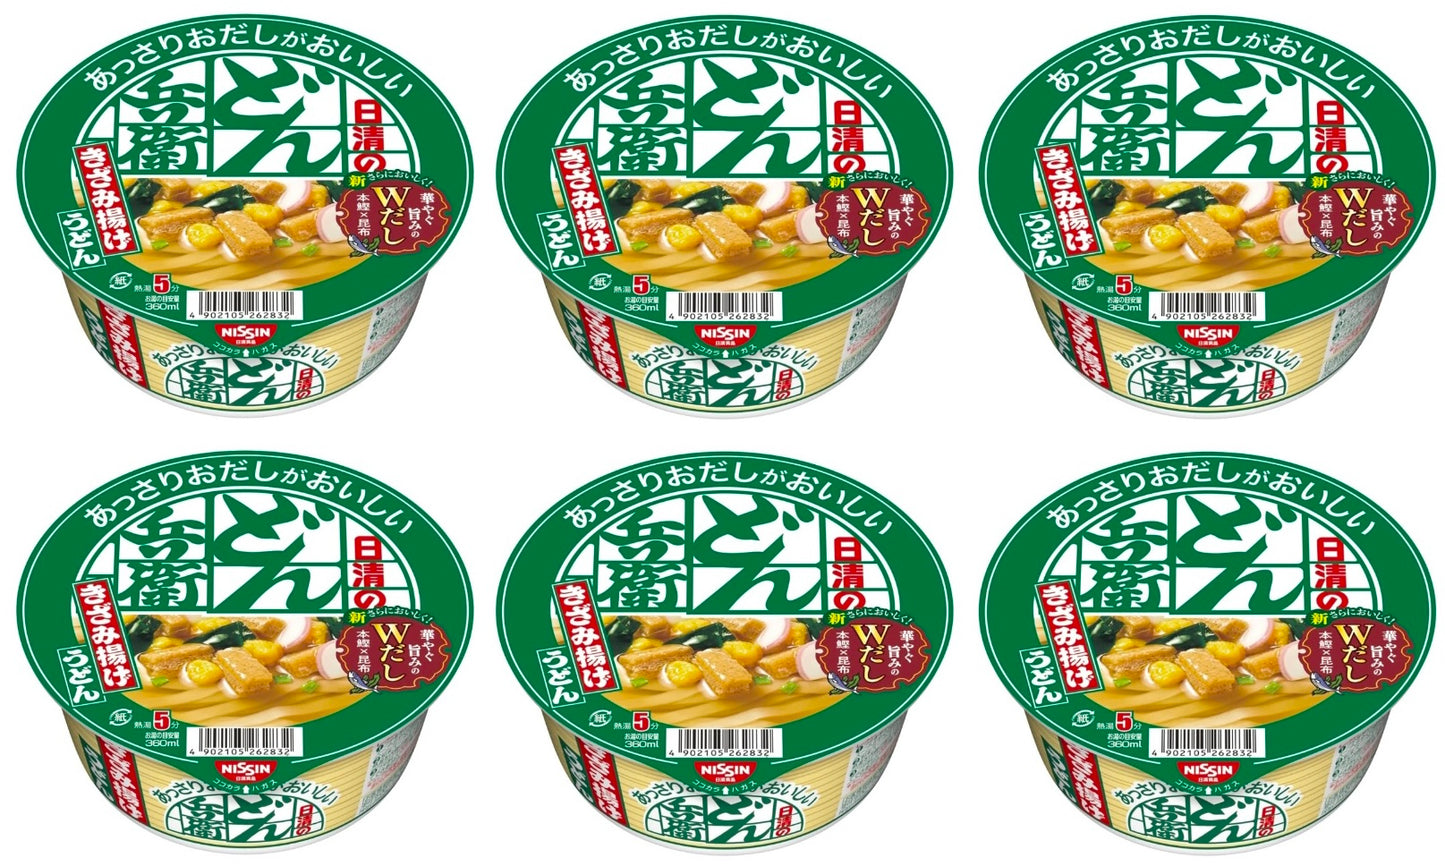 NISSIN Donbei Udon Noodles Fried Tofu Soy Sauce Soup Instant Cup Japanese 68g